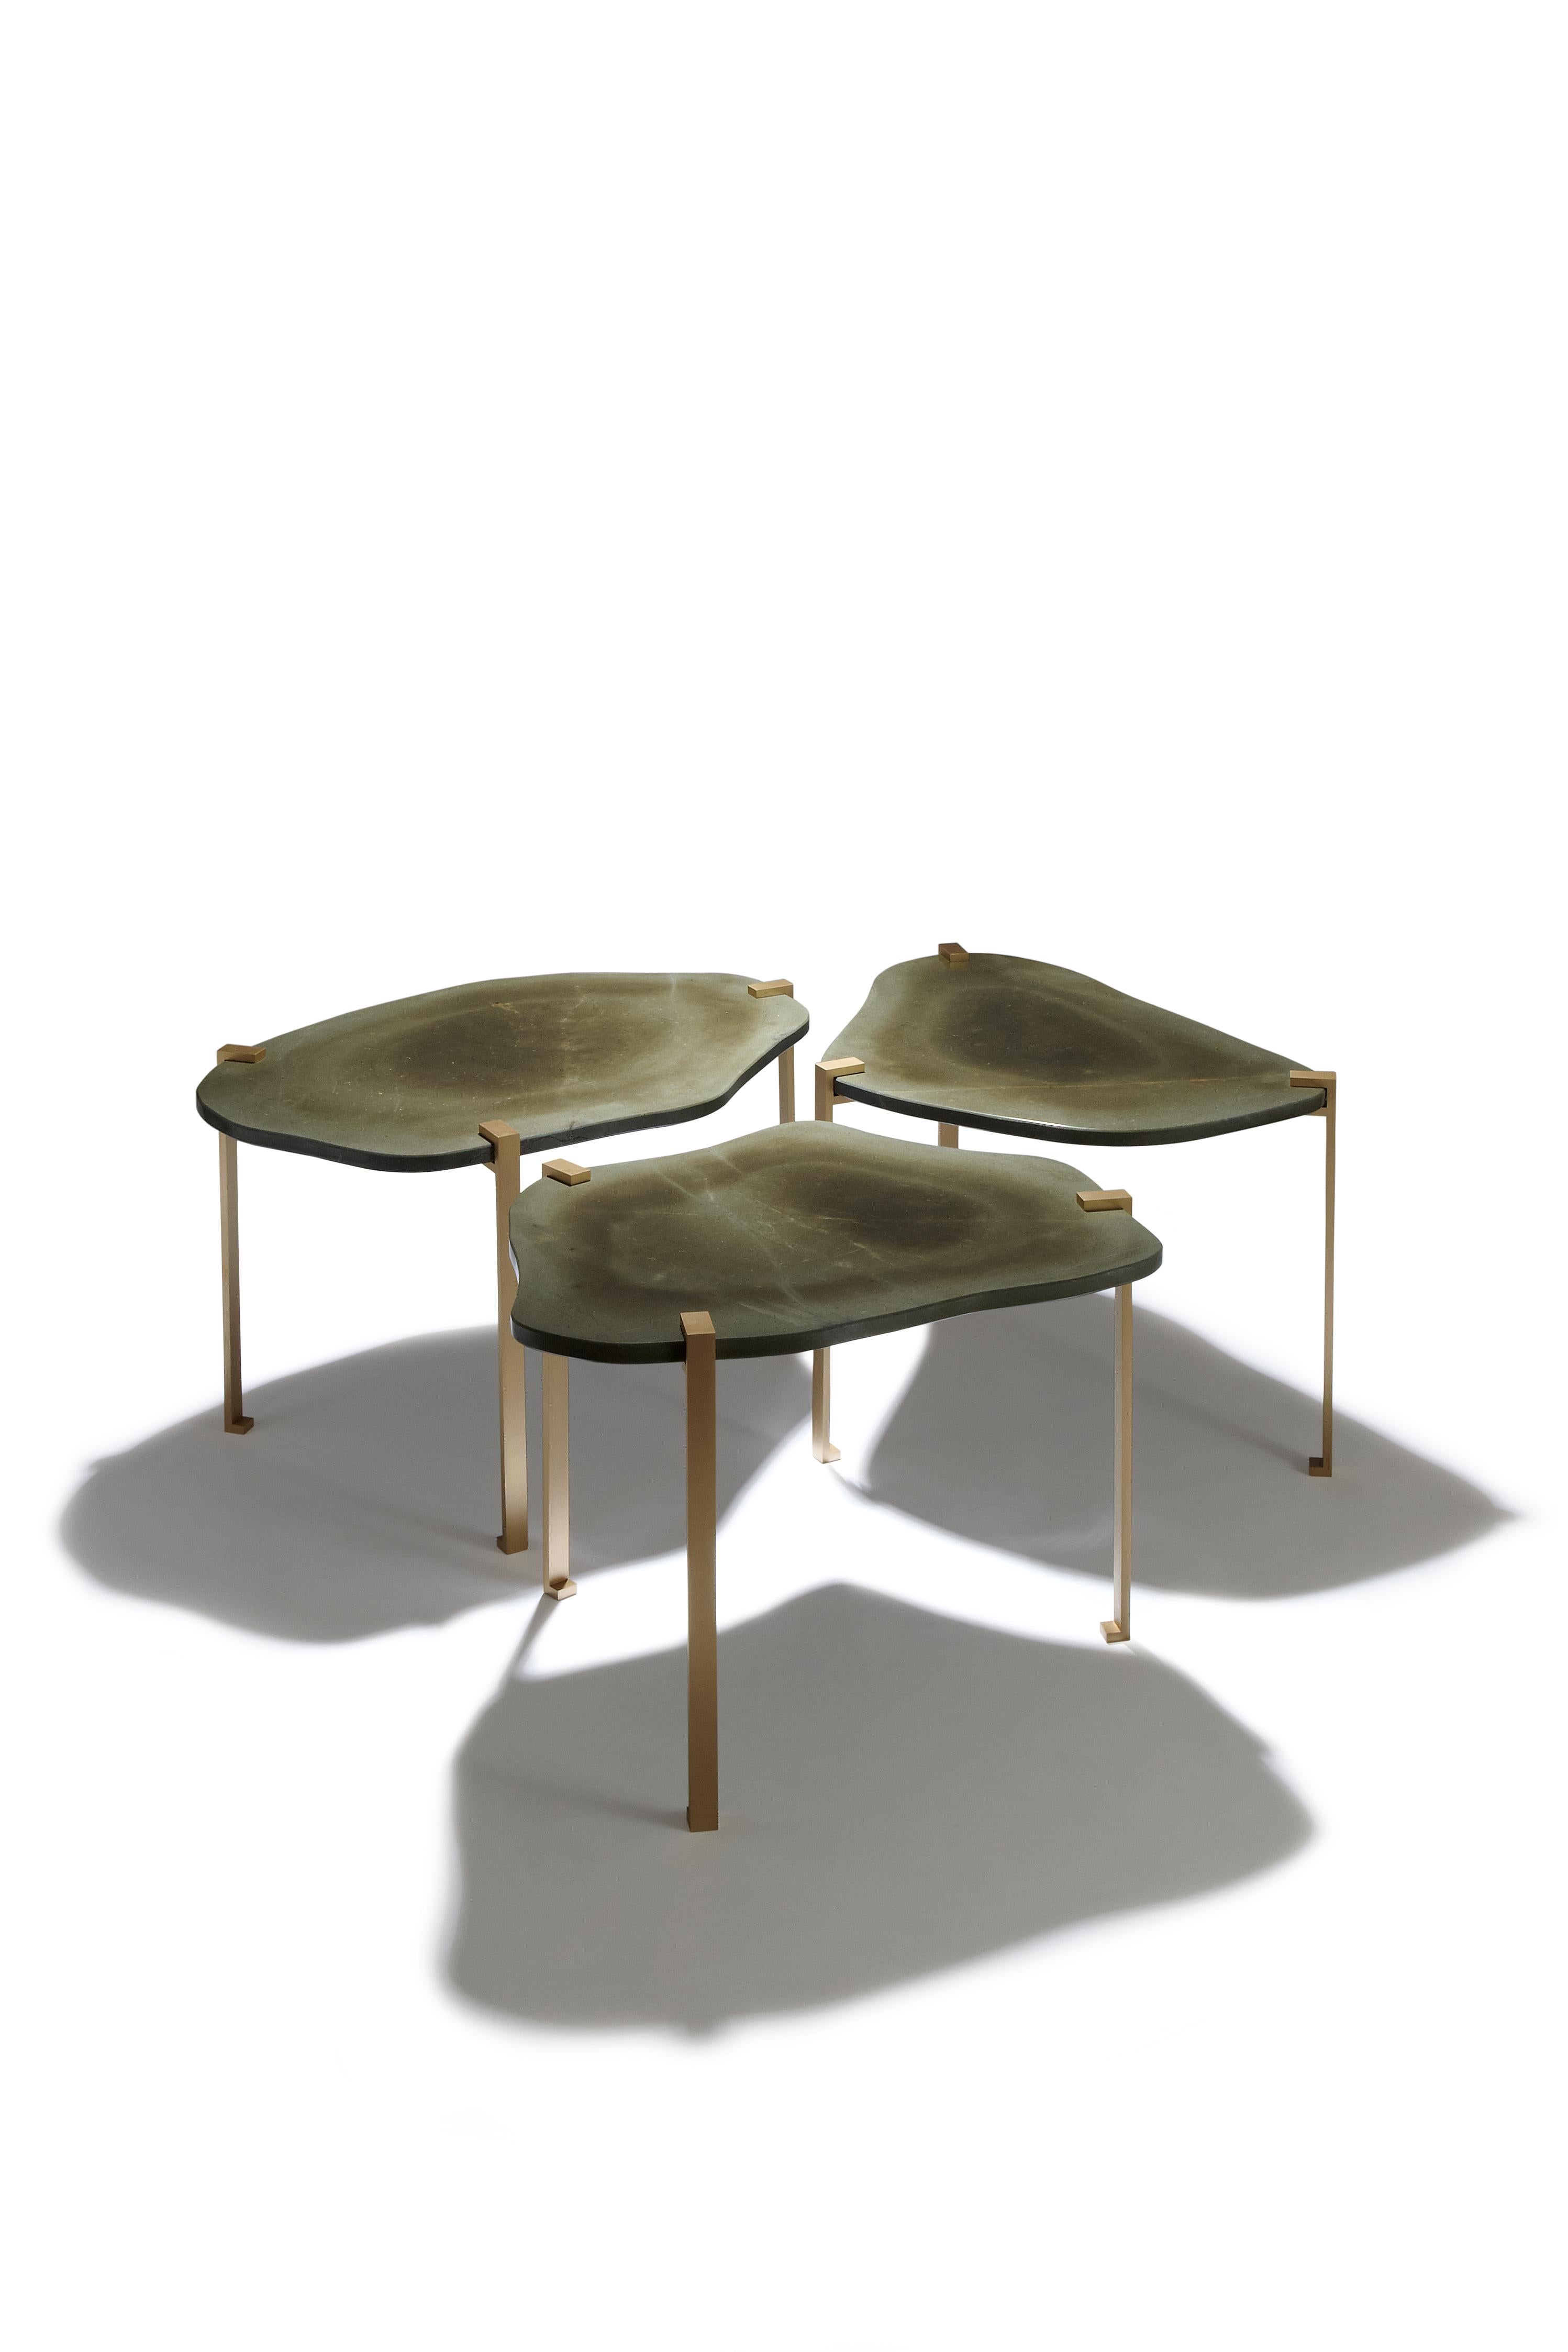 French Marble Side Tables Turtle by Hervé Langlais, One-off, France, 2015 For Sale